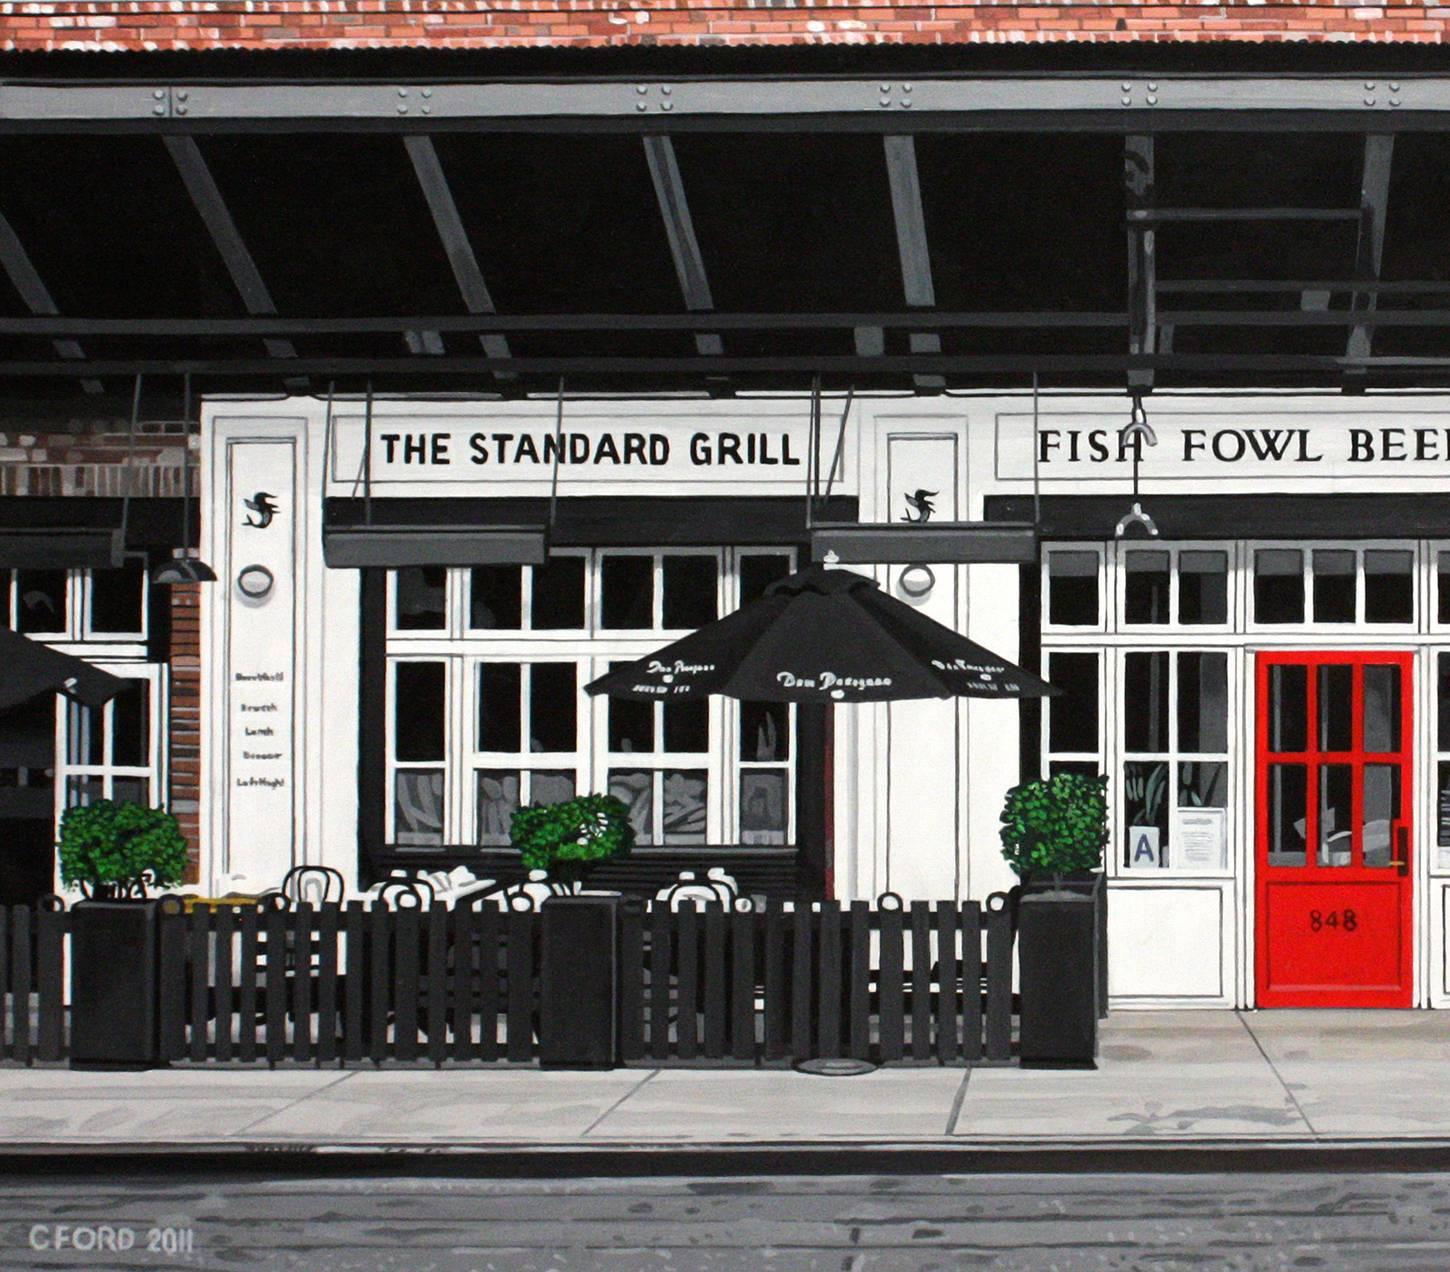 The Standard Grill at The High Line, Acrylique sur Masonite, New York City - Painting de Charles Ford